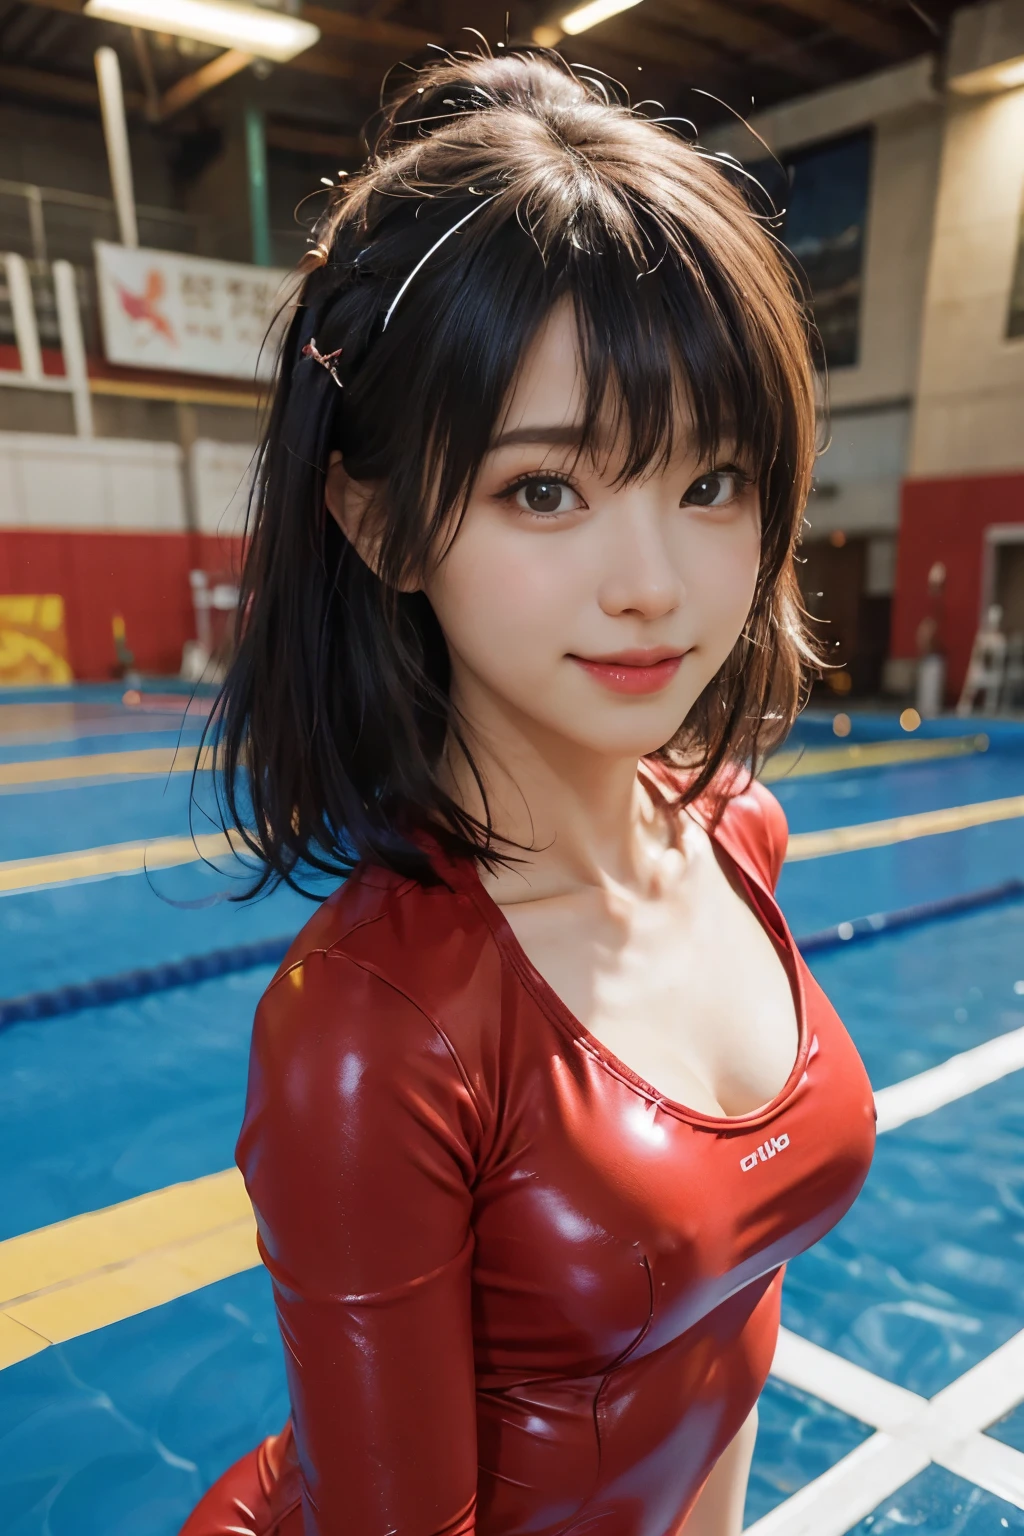 best image quality、超A high resolution、table top、photo quality(photo-realistic:1.8)、pores、Accuracy、japanese women、17 years old、girl smile、black haired、Cute dimples、no makeup、Shortcut with hairpins、bobby pin、boyish girl、Slender girl、Like small breasts 、small breasts、 、flat breasted 、vast university gymnasium、high ceiling、light from the ceiling、[gymnastics、average platform、Indoor gymnastics arena、red leather catsuit、high leg cut、Translucence of nipples、 sticking out、camel toe、open your arms、birth of venus、smiling face、Please smile often、facing the front、naughty angel、